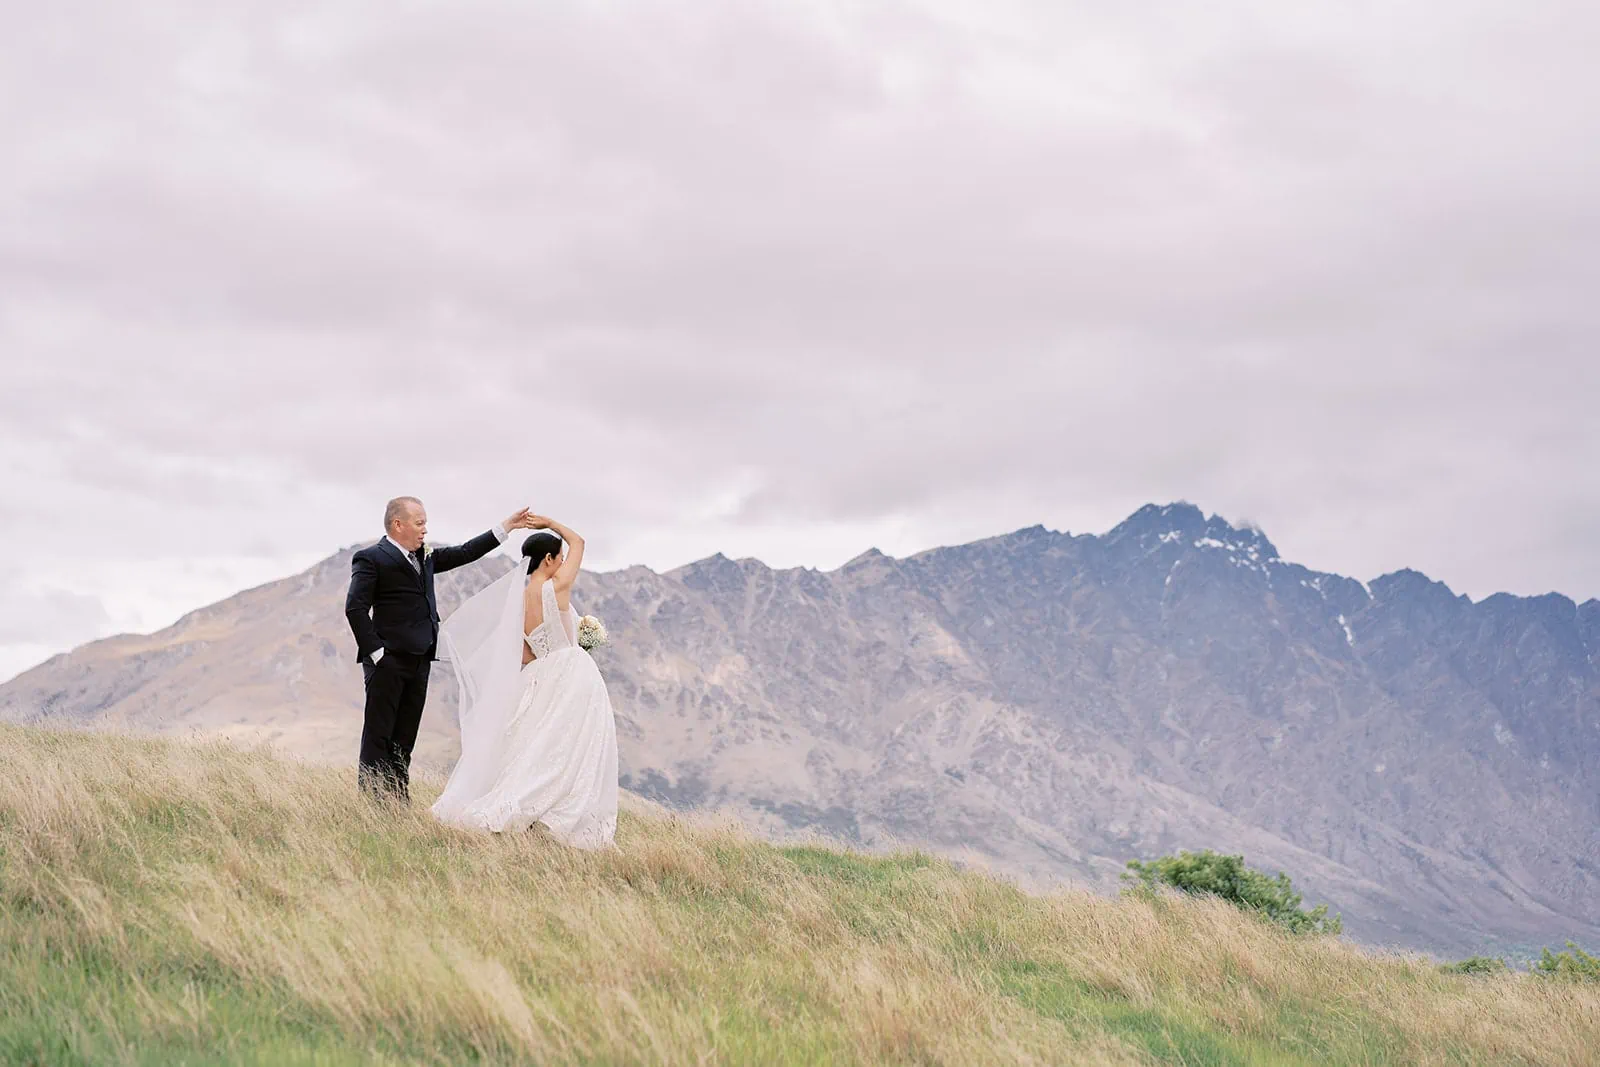 Queenstown Elopement Heli Wedding Photographer クイーンズタウン結婚式 | Meng and Joel, a bride and groom, standing on a grassy hill with mountains in the background at Stoneridge Estate.